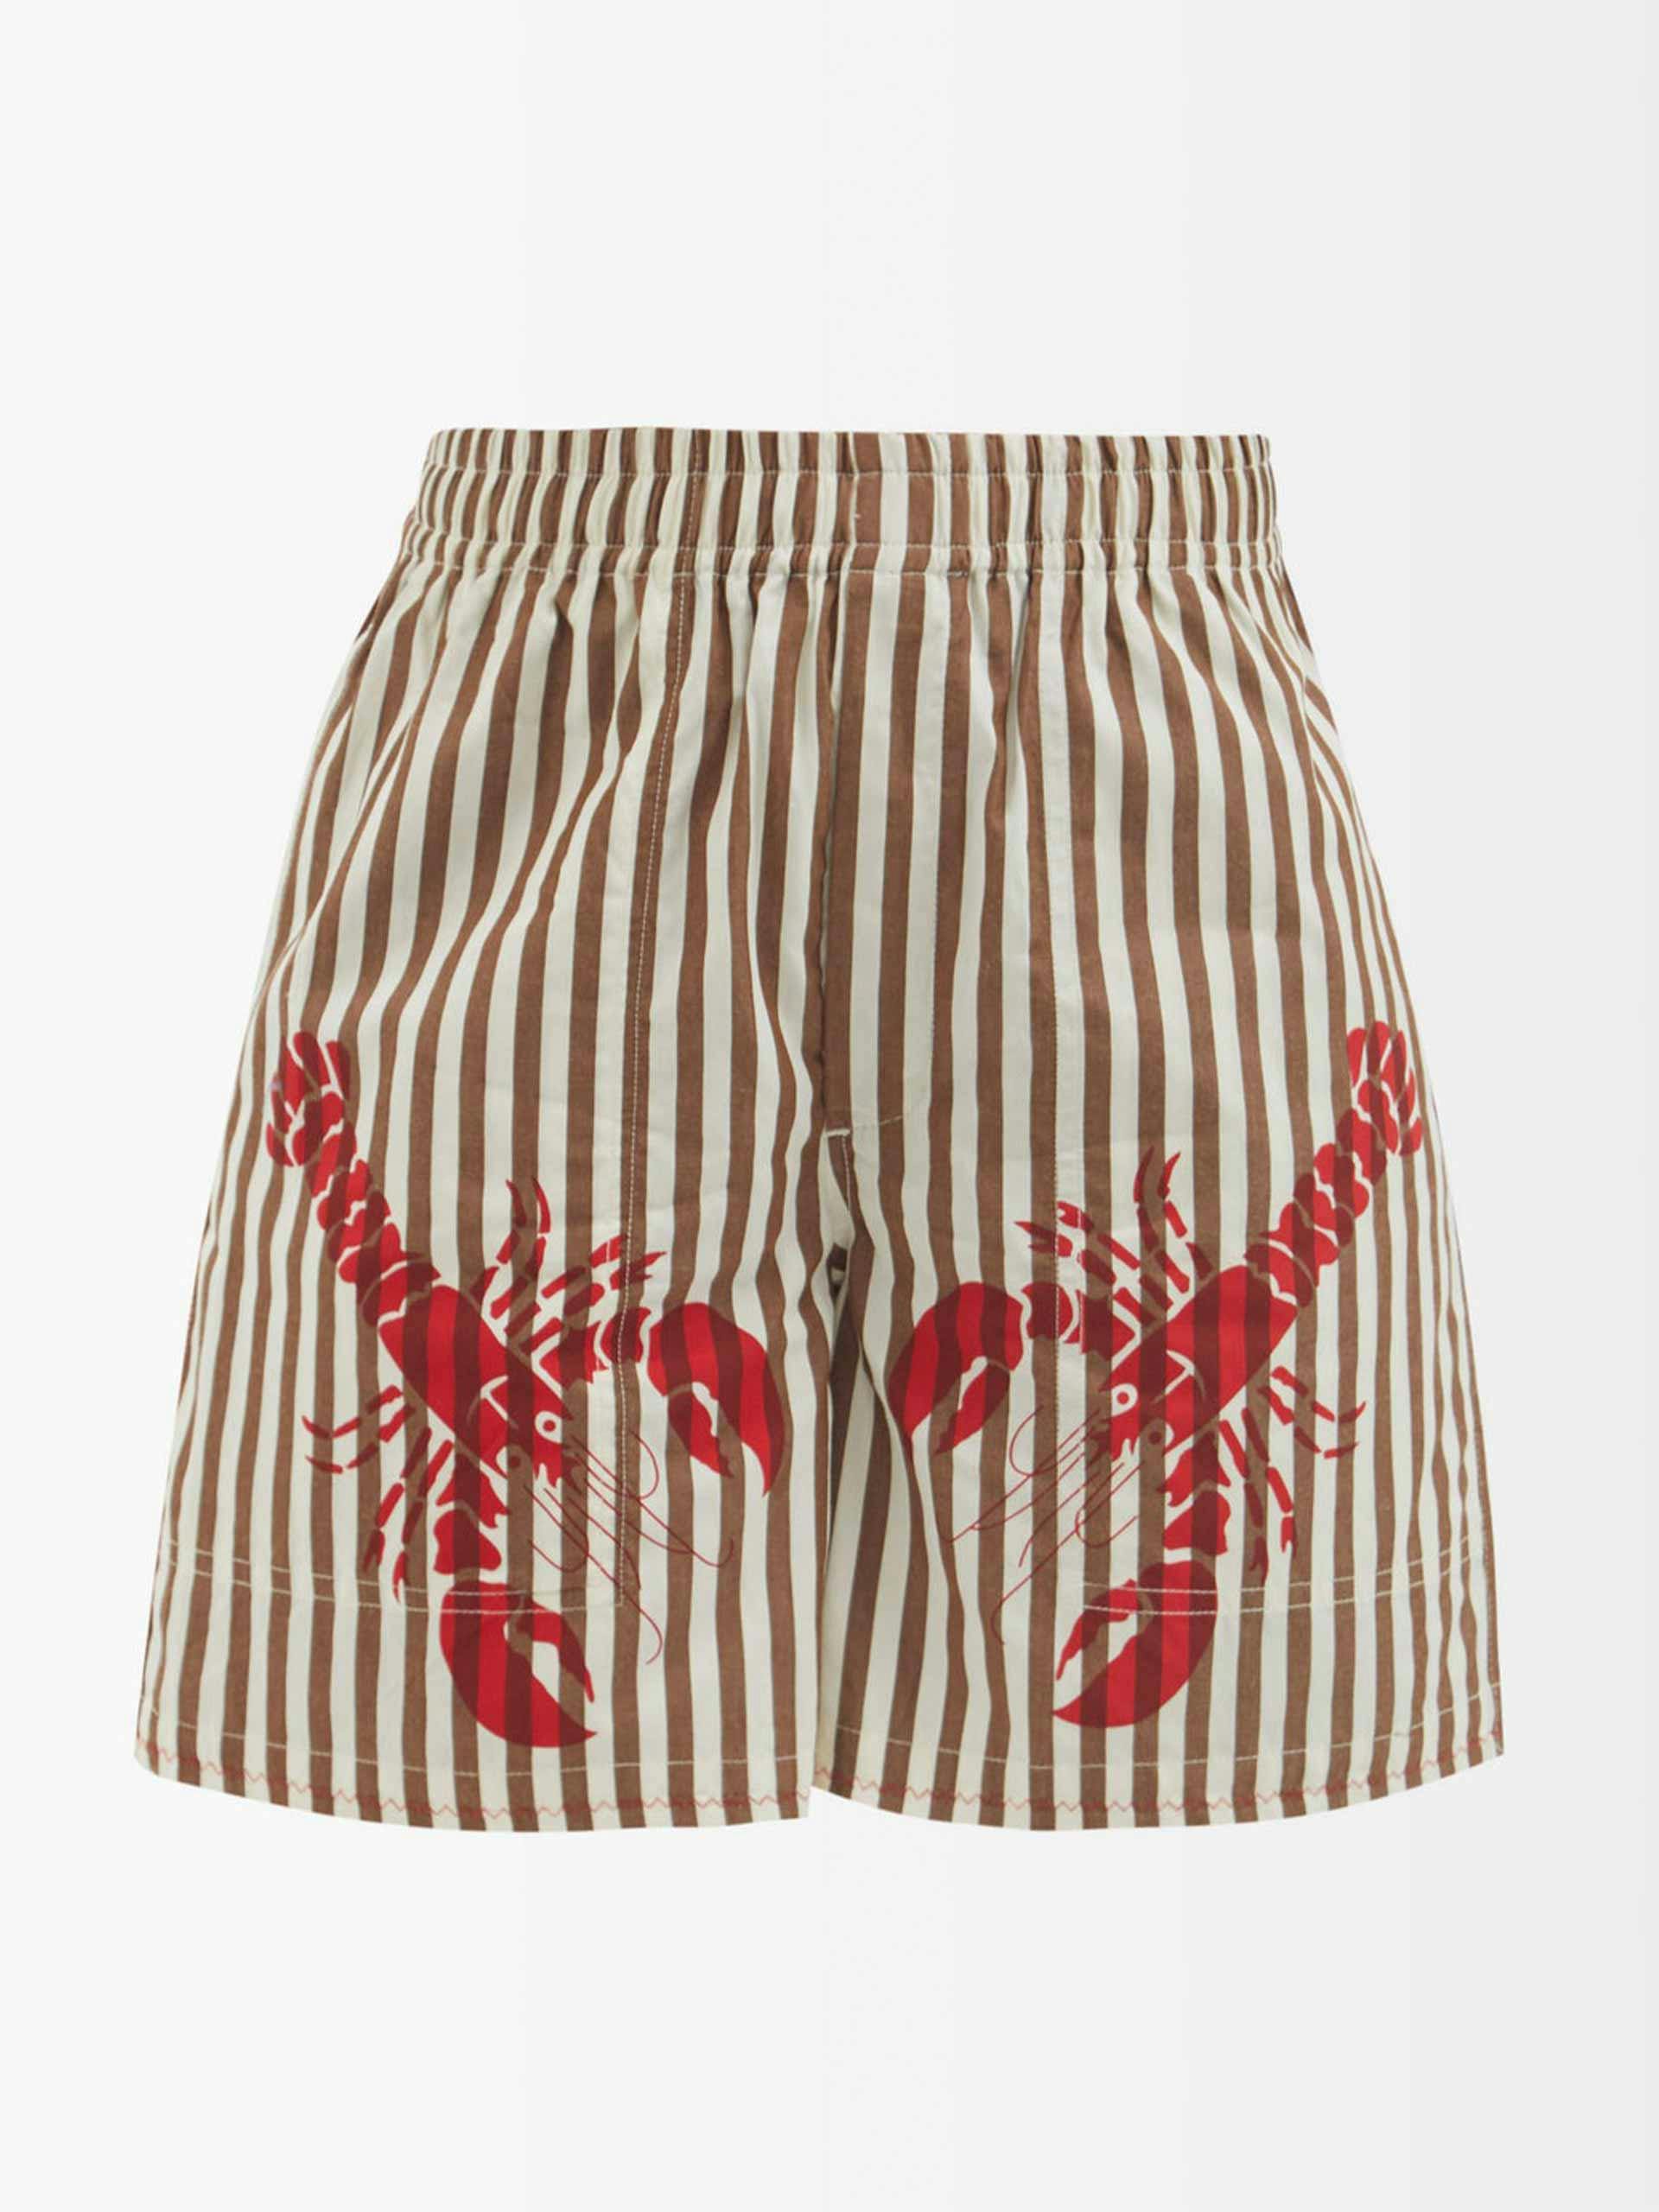 Lobster-print striped cotton shorts